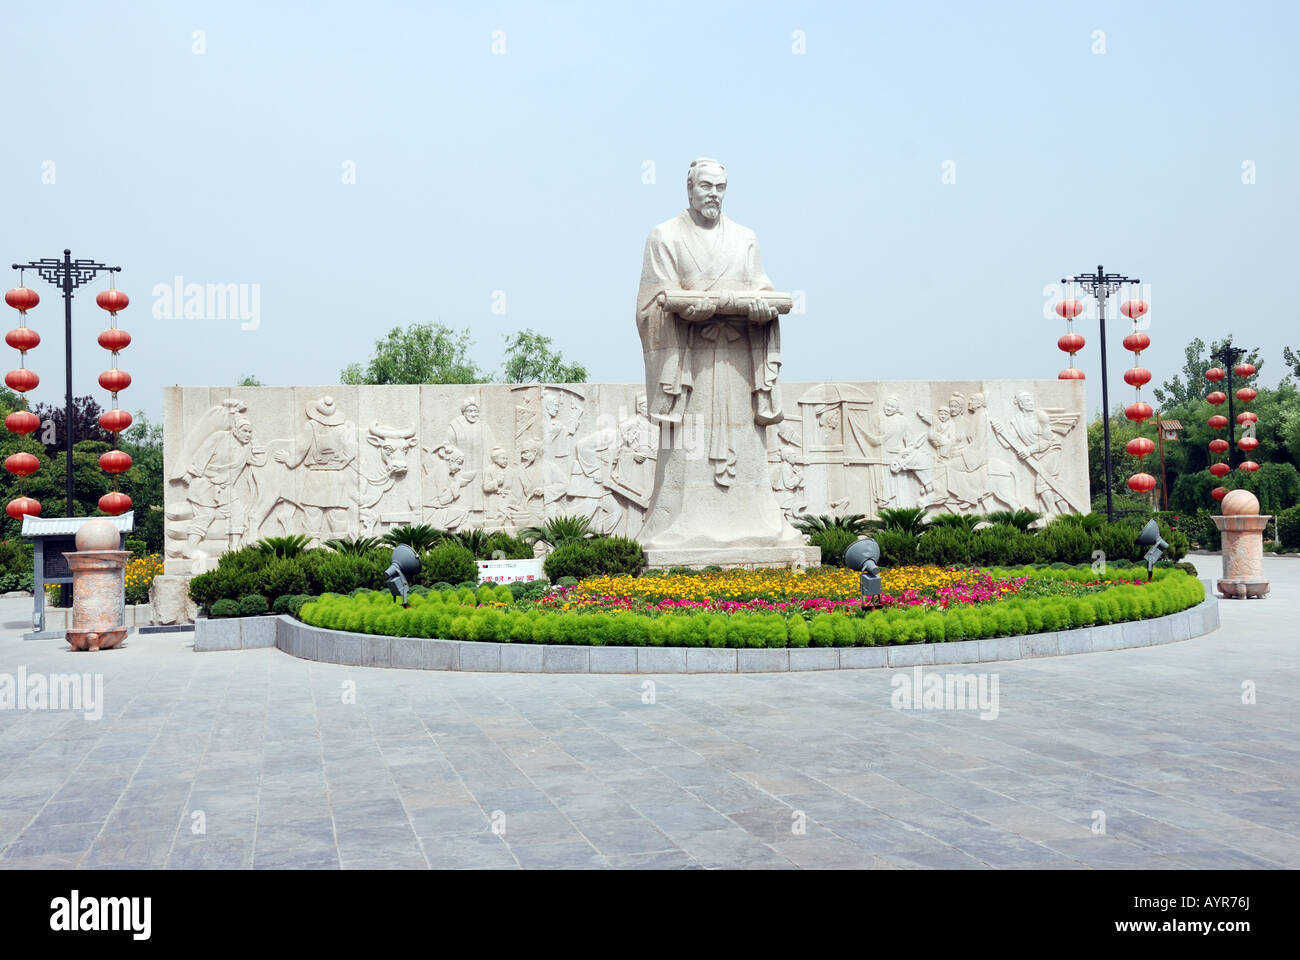 Statue of Zhang Zeduan a famous painter of the Song Dynasty plus a mural at the entrance of Milleneum City Park Kaifeng Henan Stock Photo